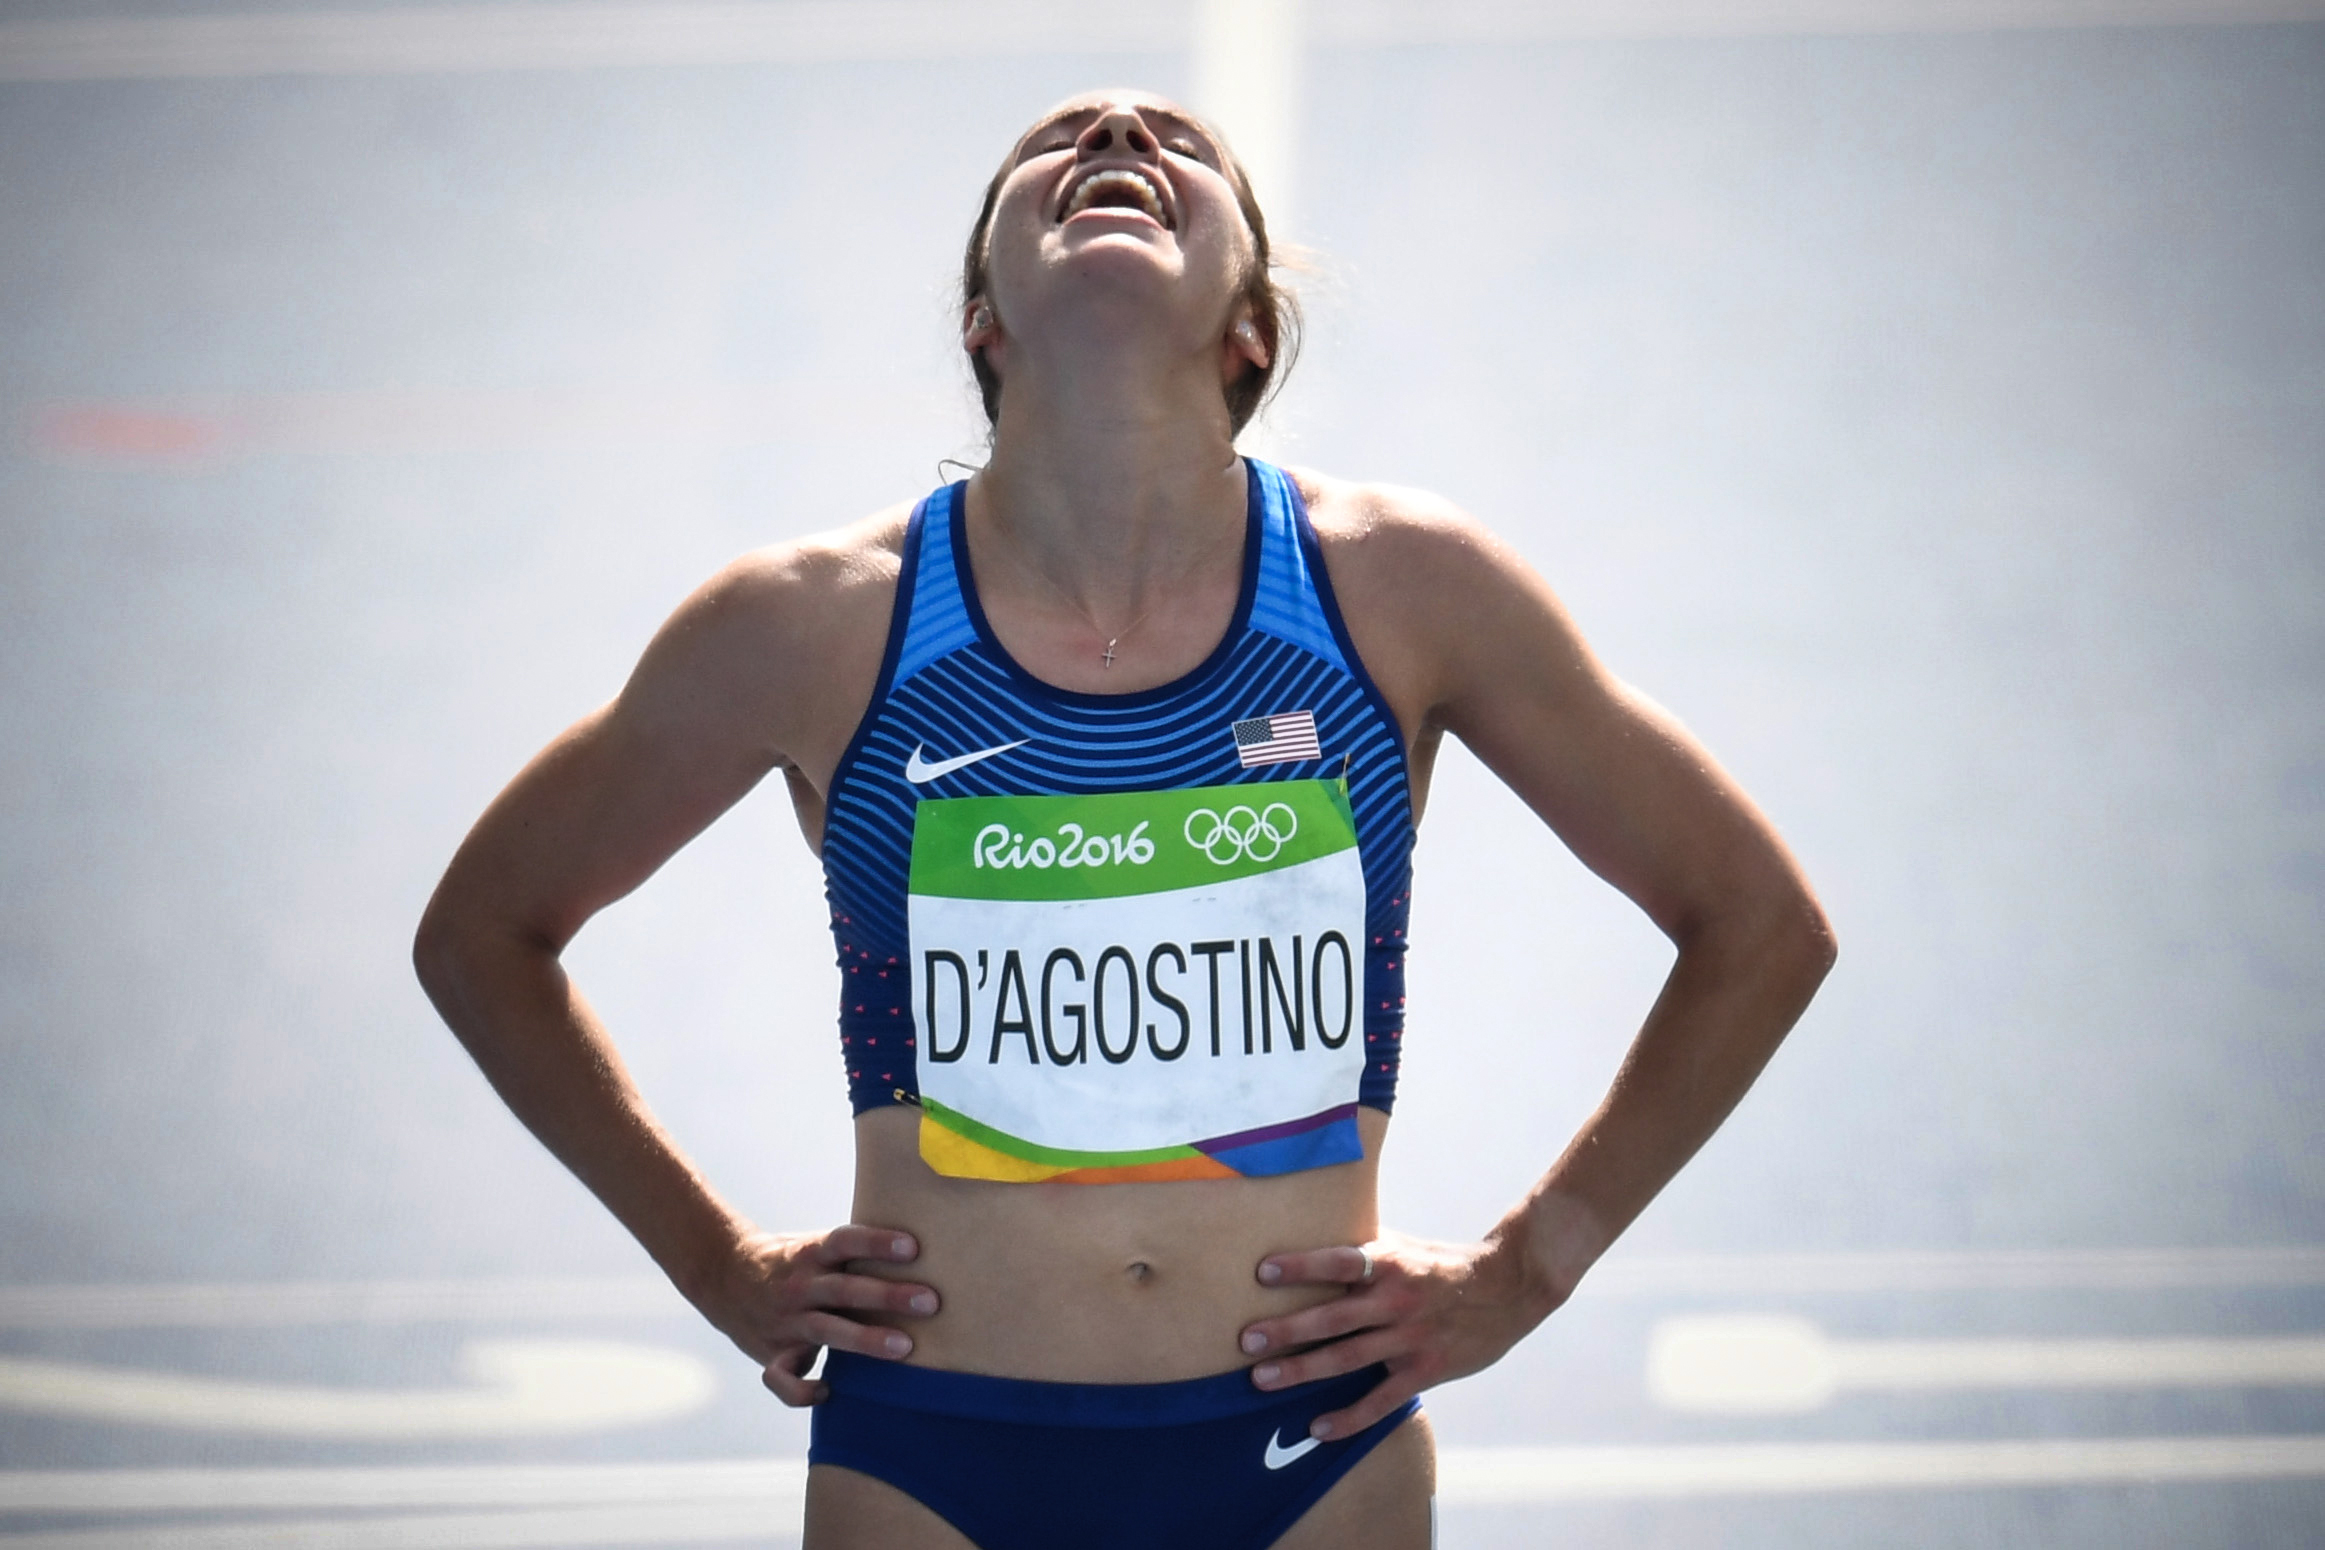 USA's Abbey D'agostino reacts after competing in the Women's 5000m Round 1 during the athletics event at the Rio 2016 Olympic Games at the Olympic Stadium in Rio de Janeiro on August 16, 2016.   / AFP PHOTO / PEDRO UGARTE